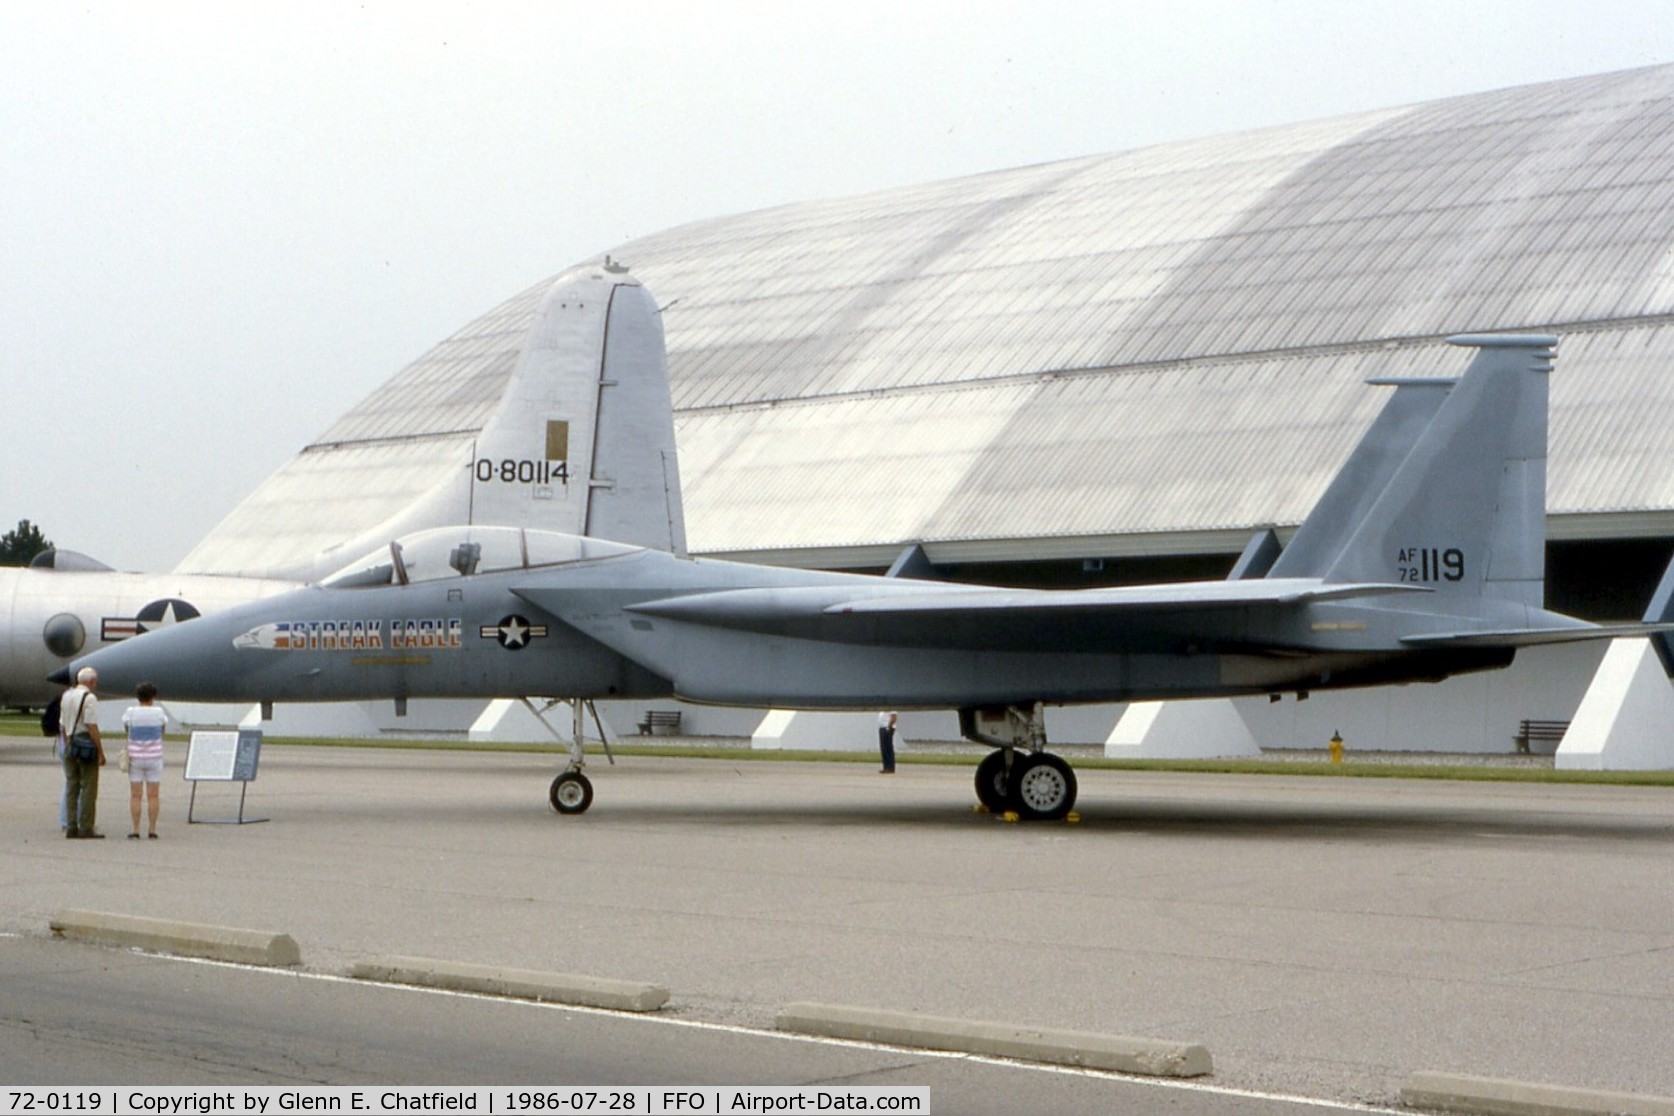 72-0119, McDonnell Douglas F-15A Eagle C/N 0019/A017, F-15A at the National Museum of the U.S. Air Force